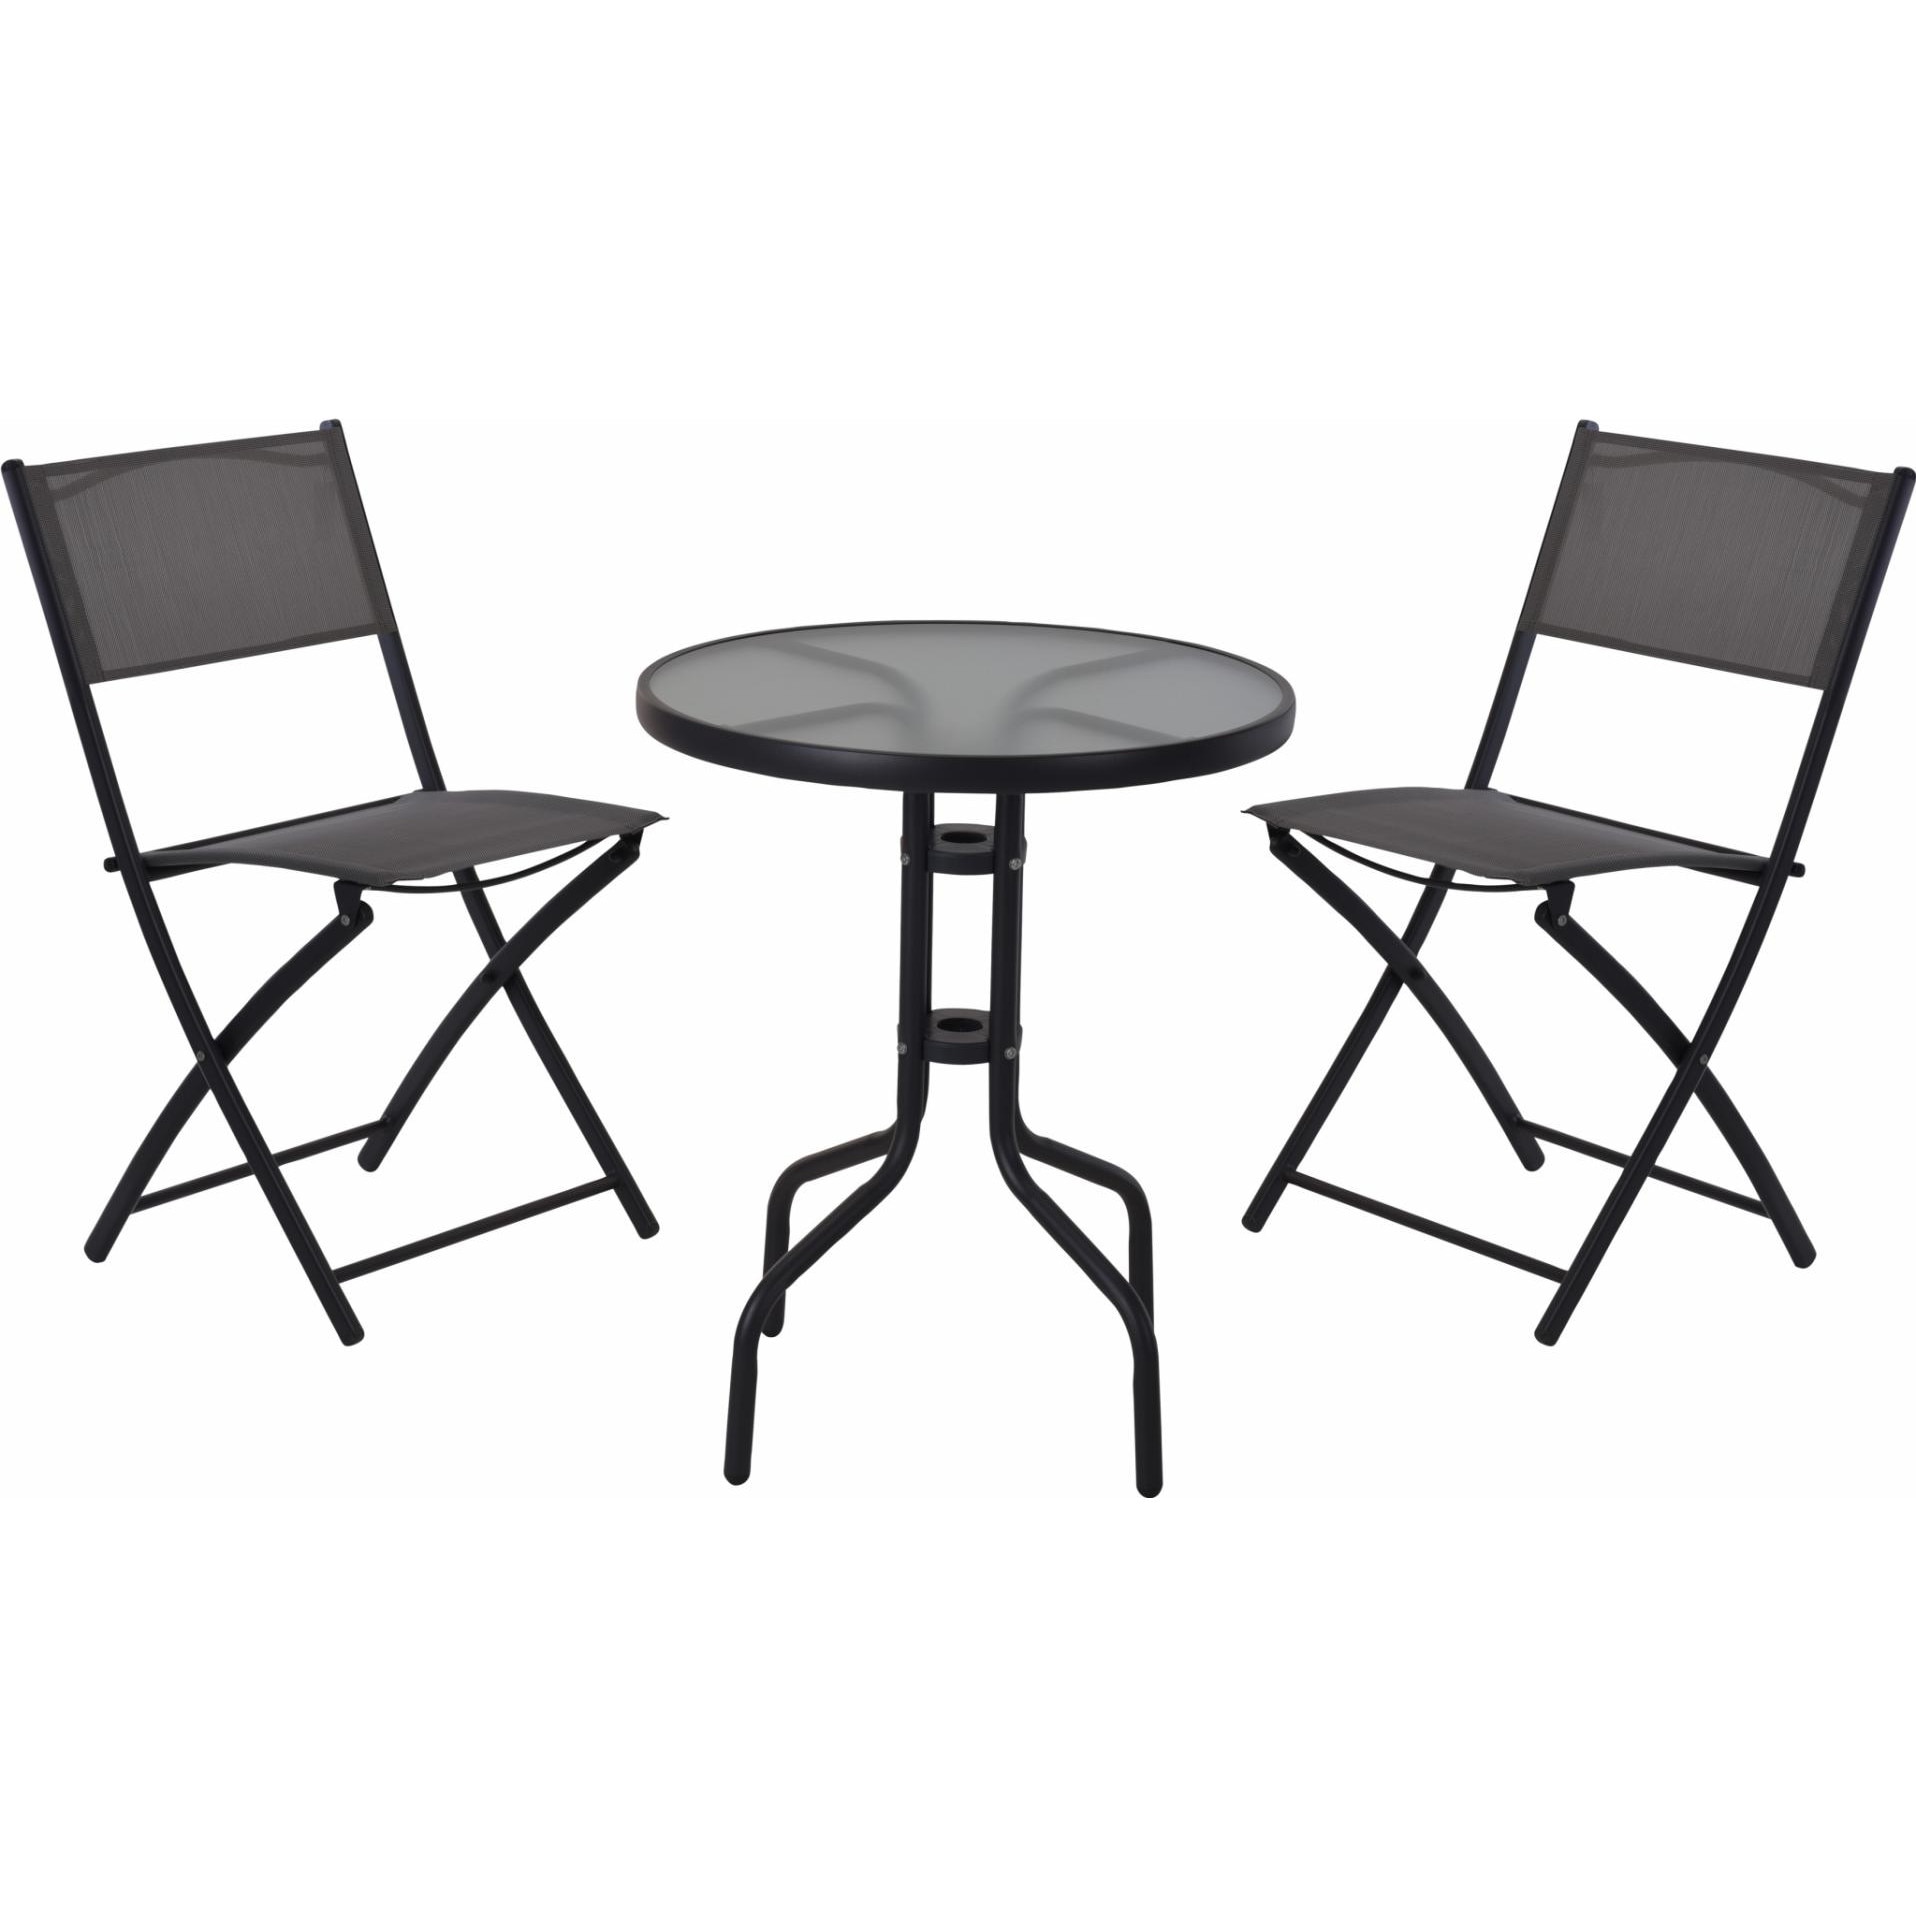 top notch Pearly Outflow Set mobilier gradina, 2 scaune si masa din sticla si metal, Negru - eMAG.ro